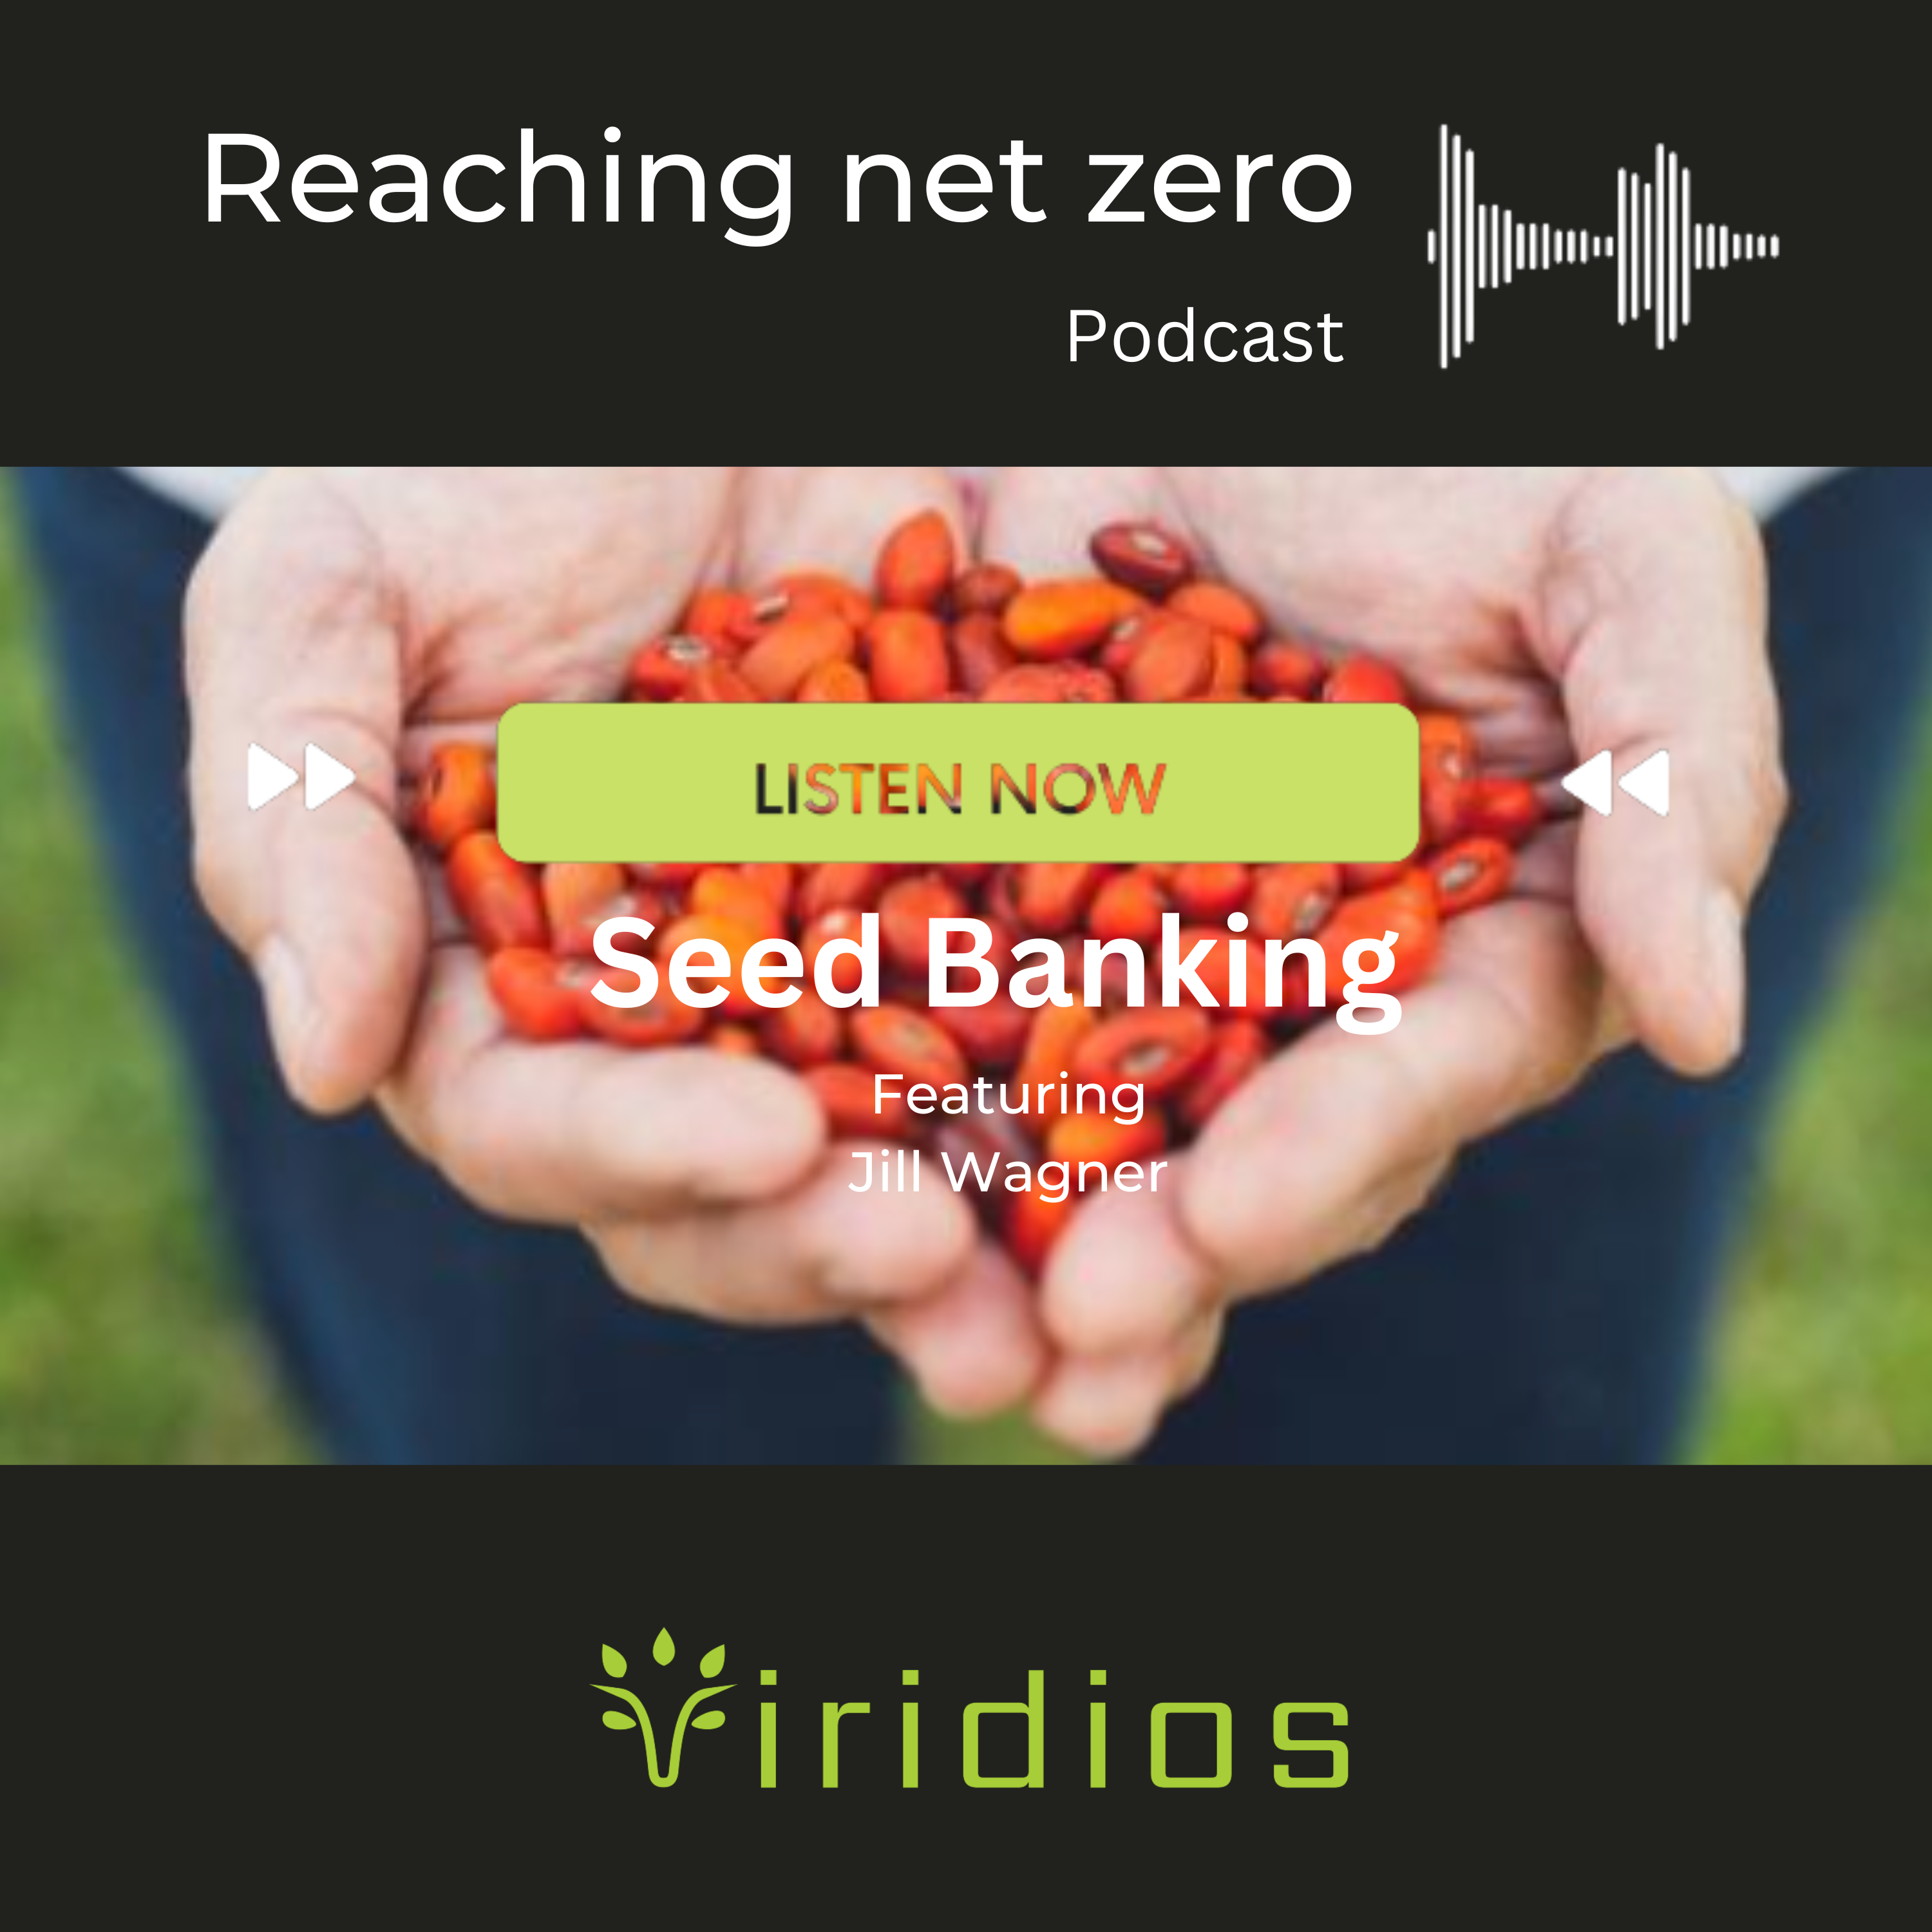 Seed banking with Jill Wagner